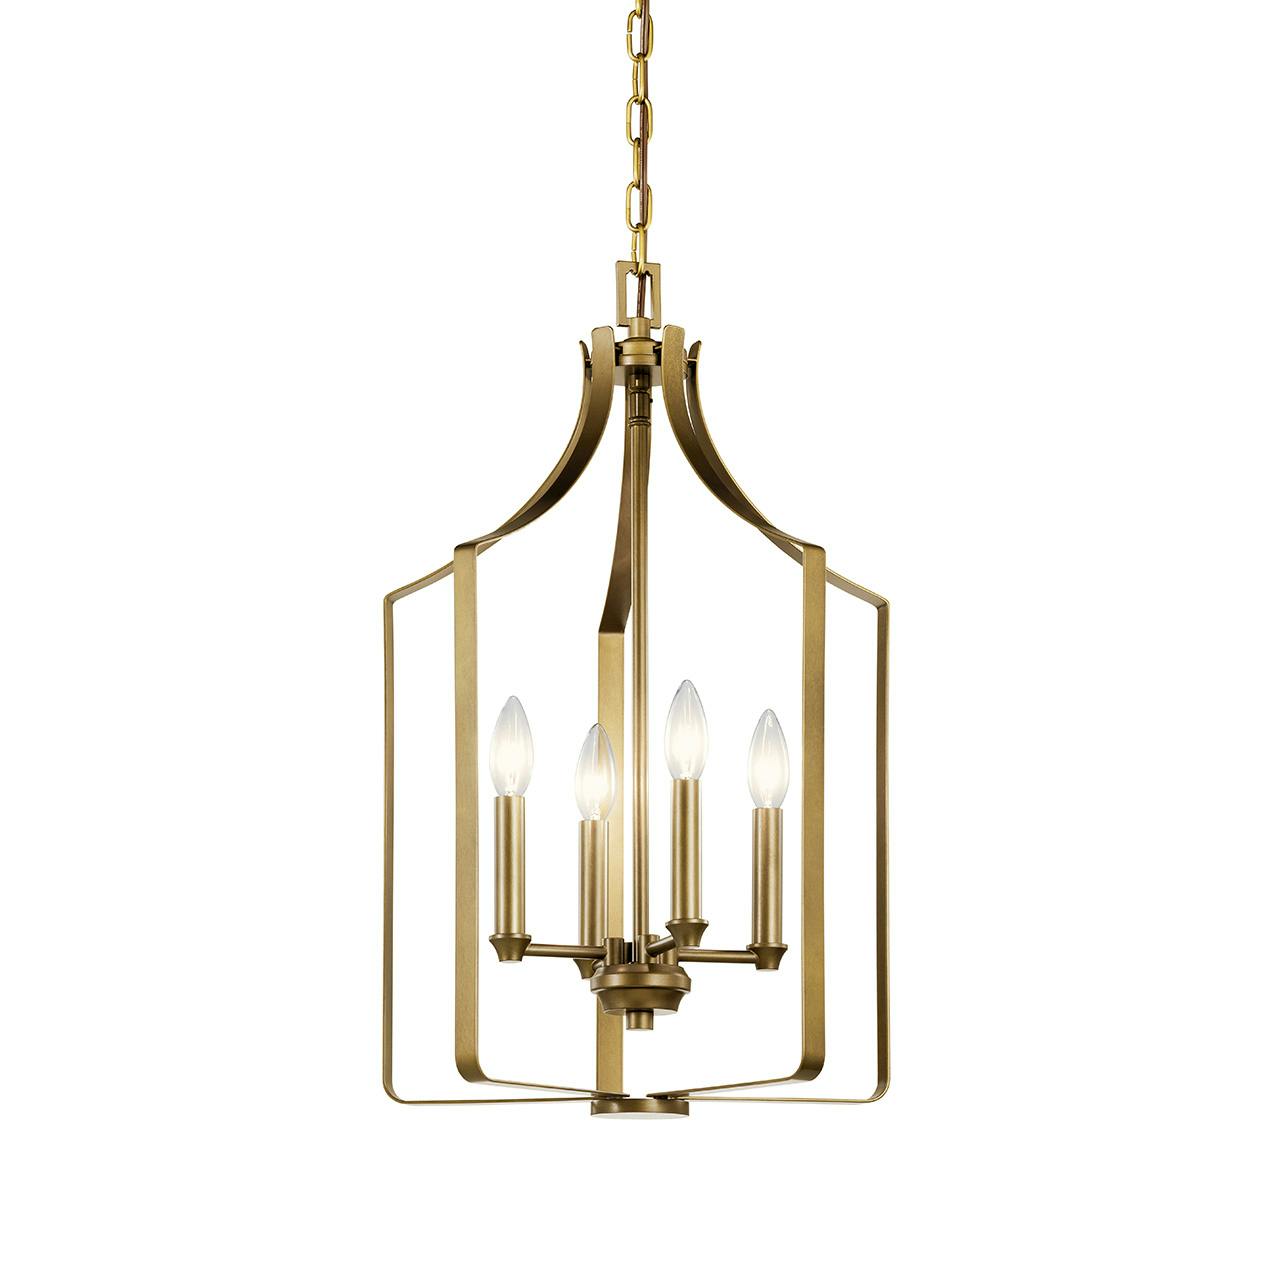 Morrigan 15" Mini Chandelier Brass without the canopy on a white background